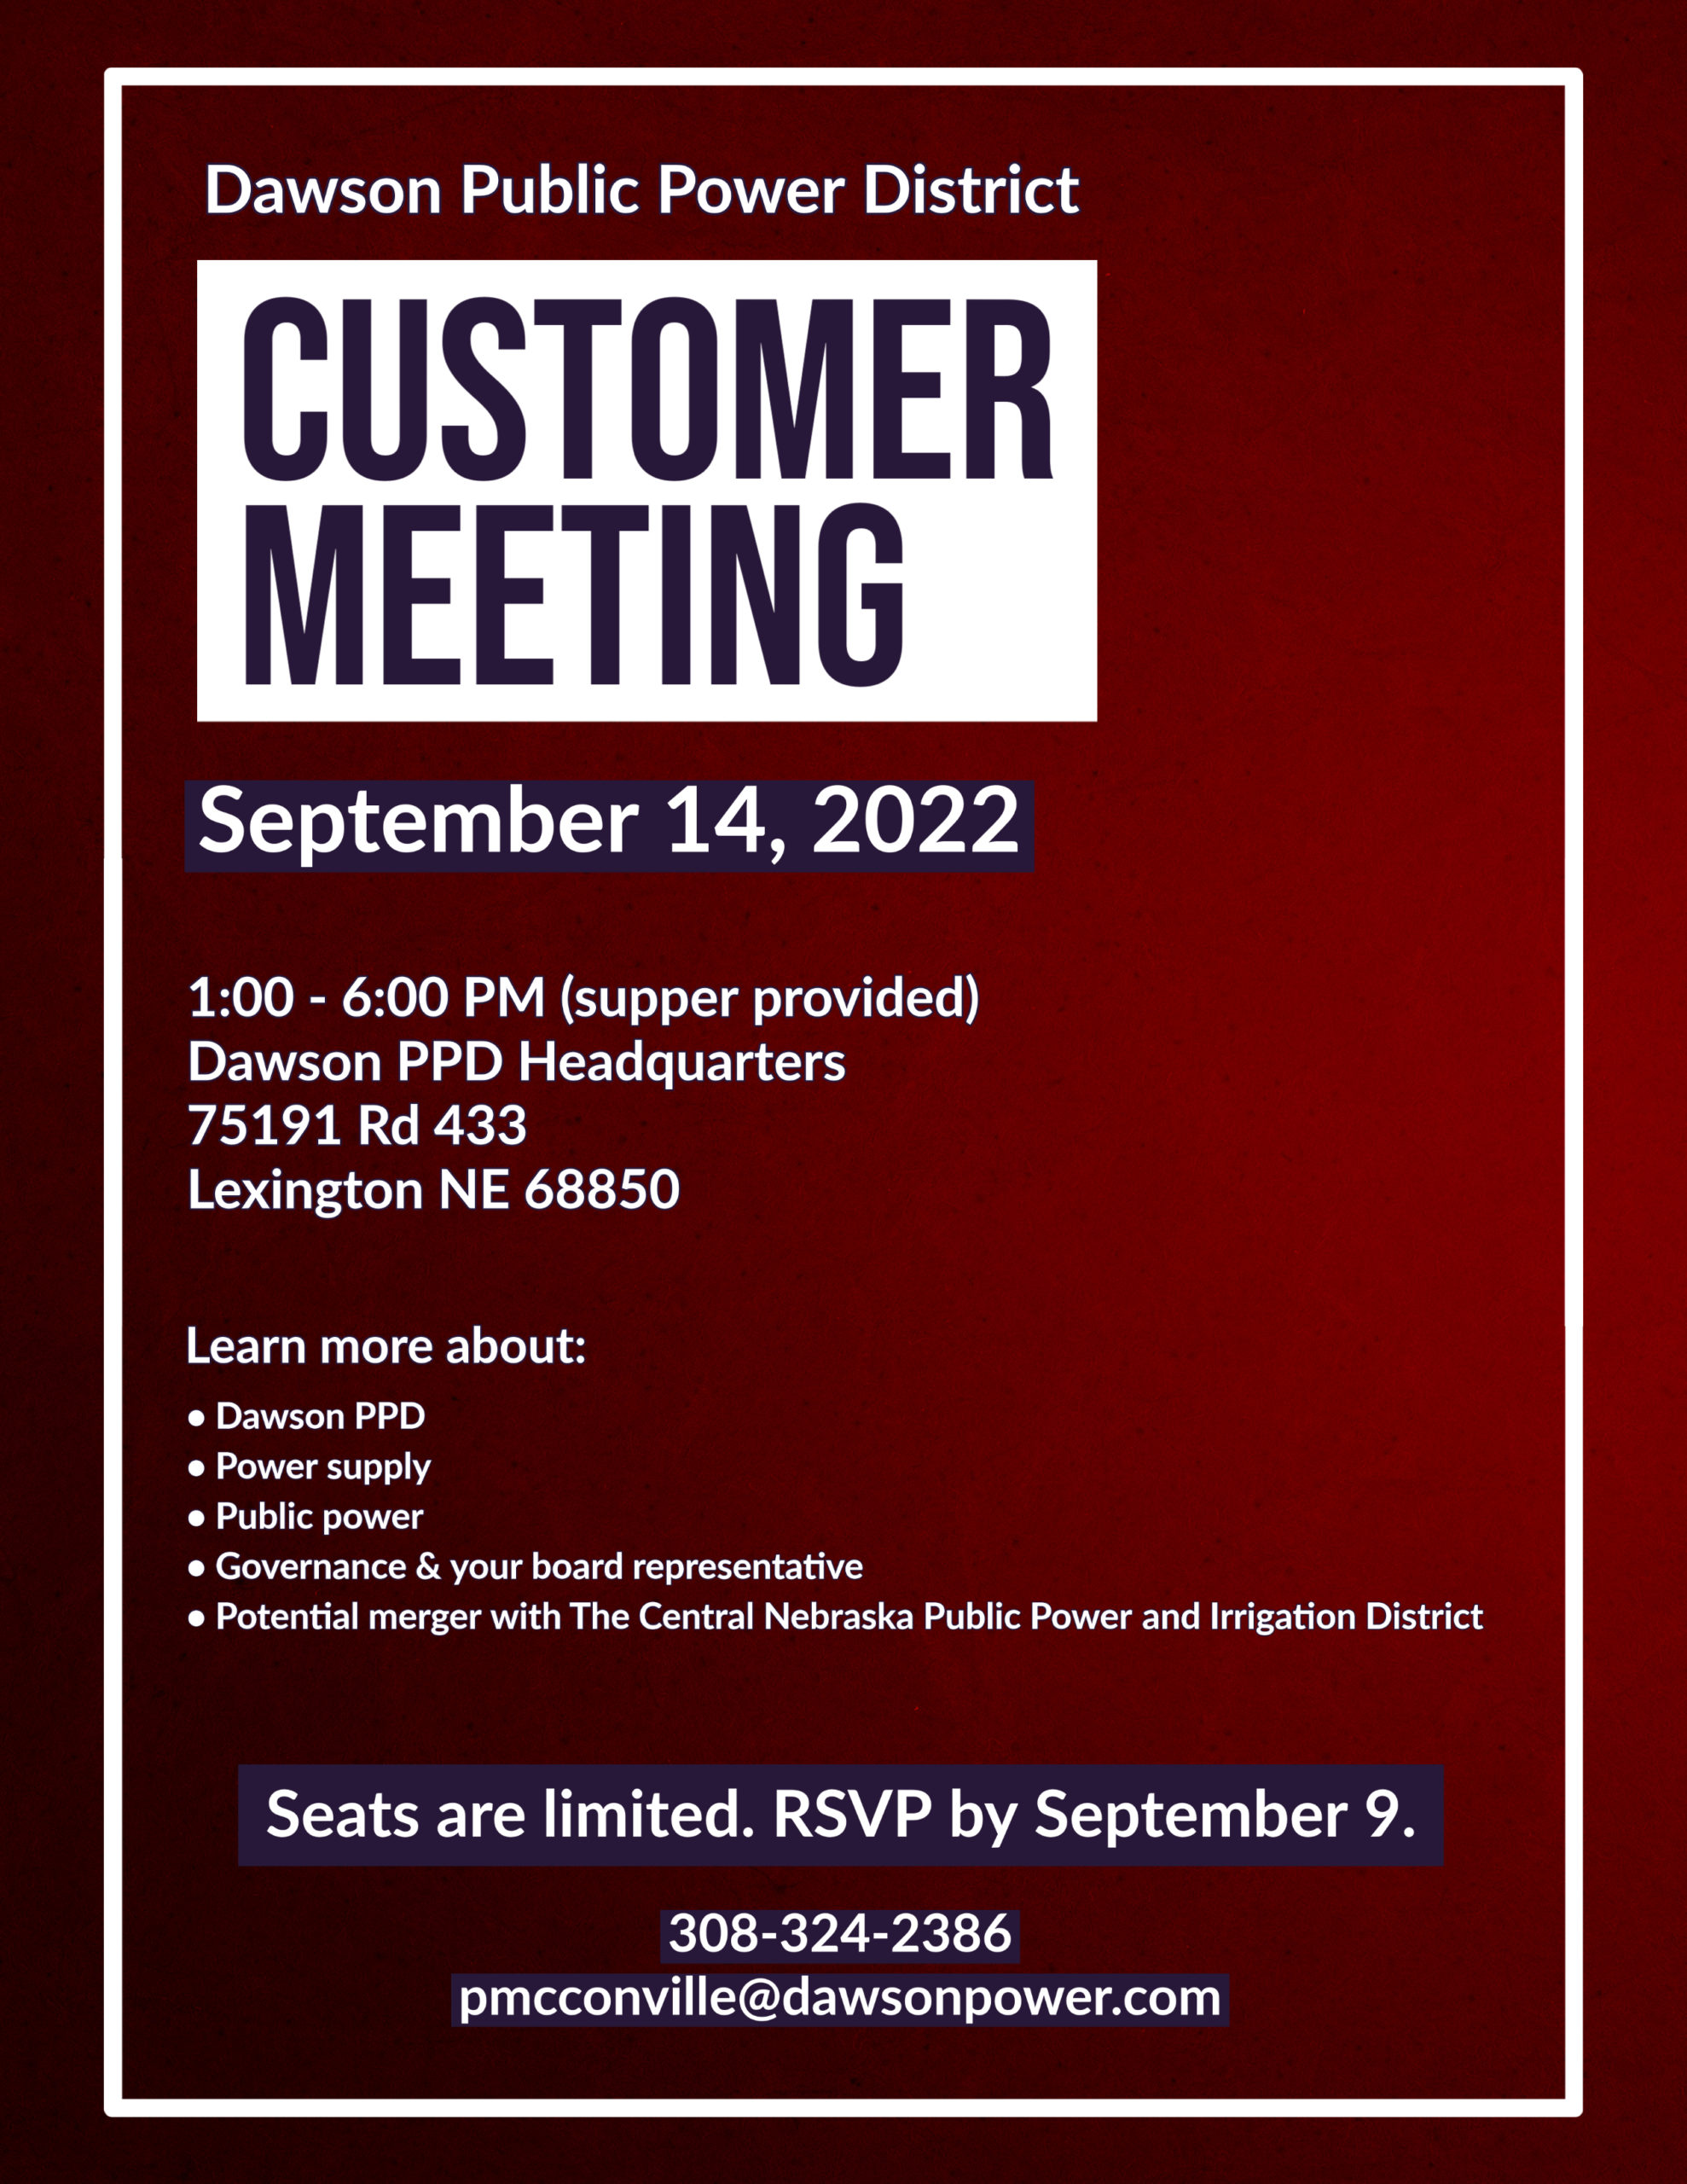 An invitation to the Dawson PPD customer meeting on September 14, 2022